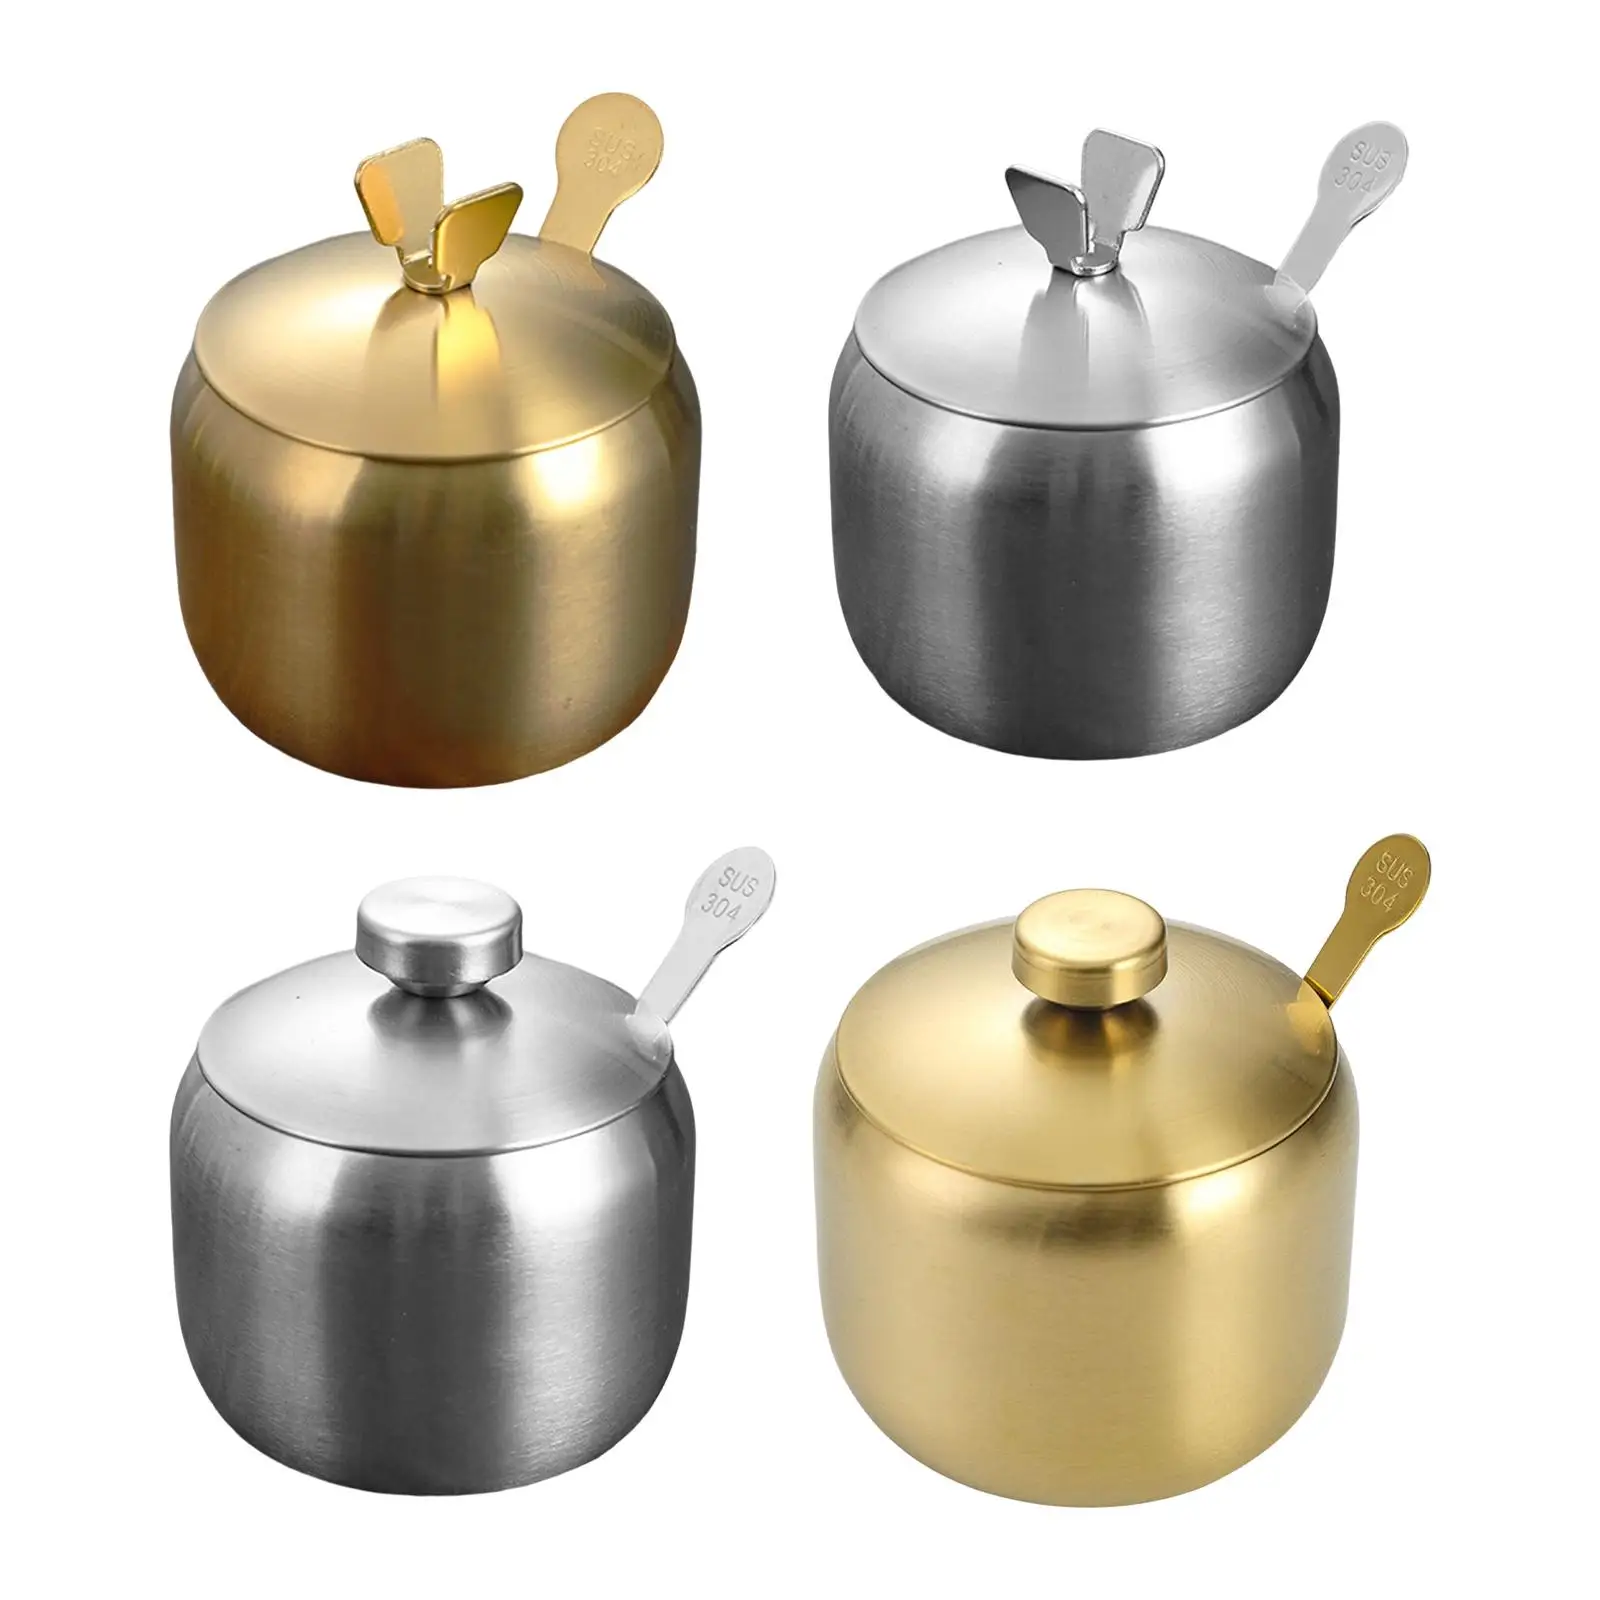 Stainless Steel Seasoning Box Kitchen Utensil Condiment Jar Spice Pots with Lid and Spoon for Pepper